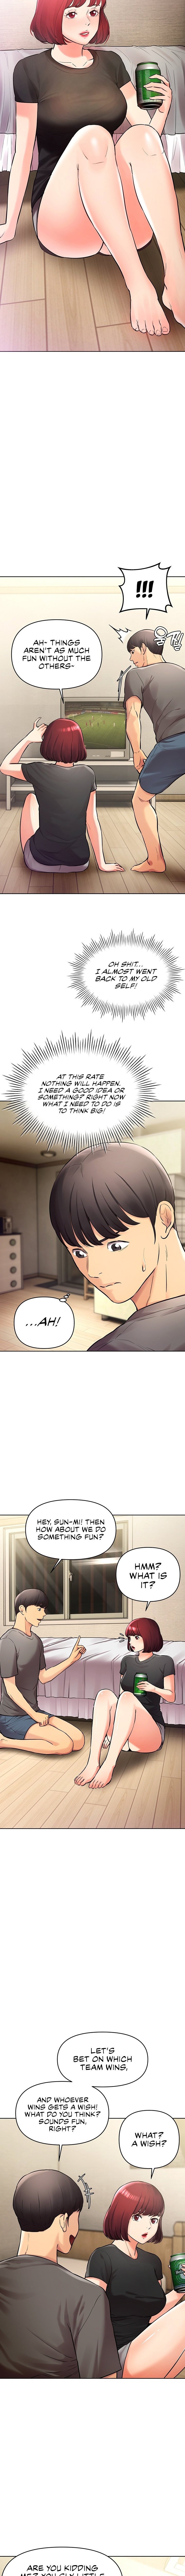 the-girls-i-couldnt-date-before-chap-22-5